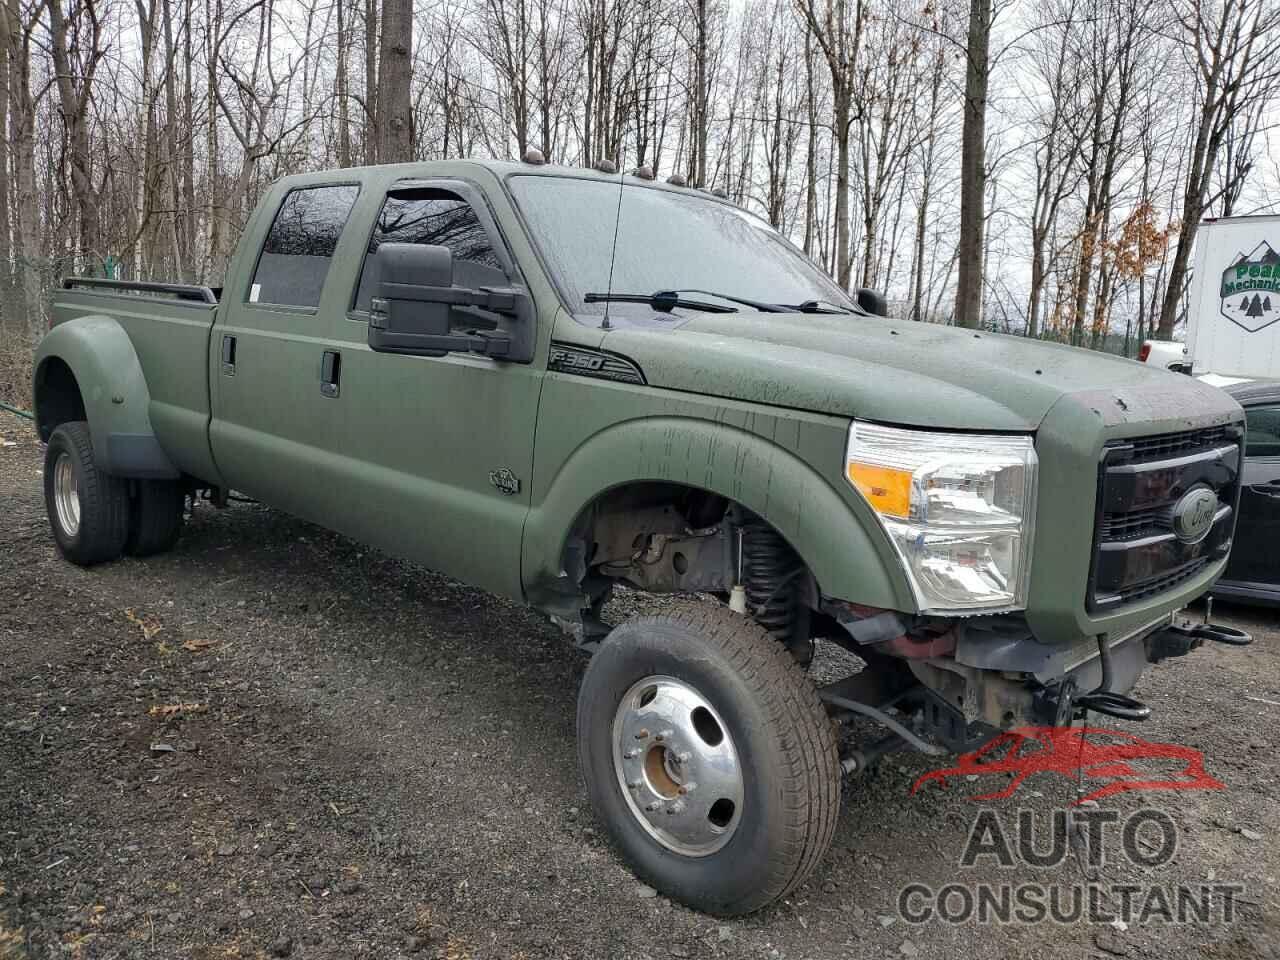 FORD F350 2016 - 1FT8W3DT7GED06102